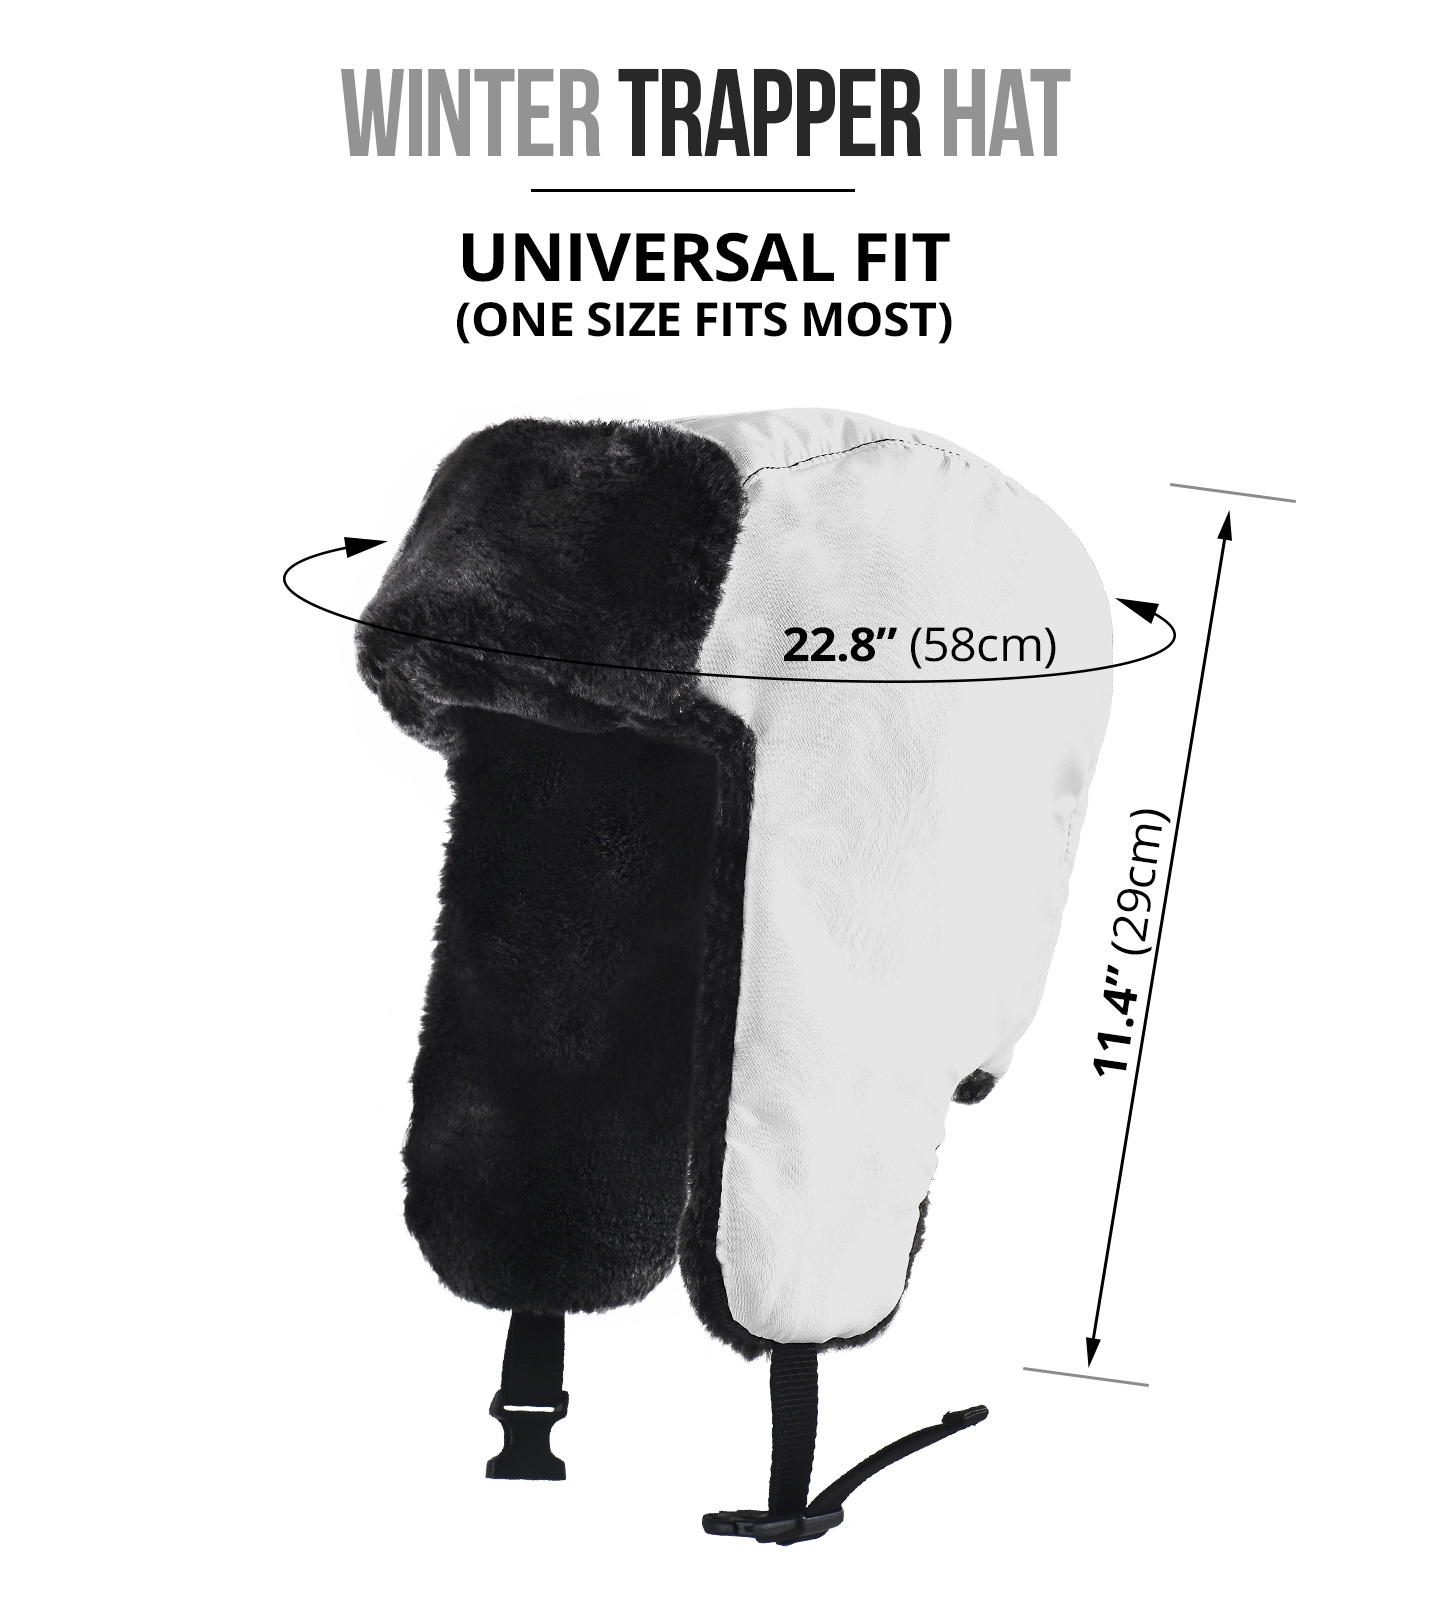 Winter Trapper Hat size chart - The Cow Print